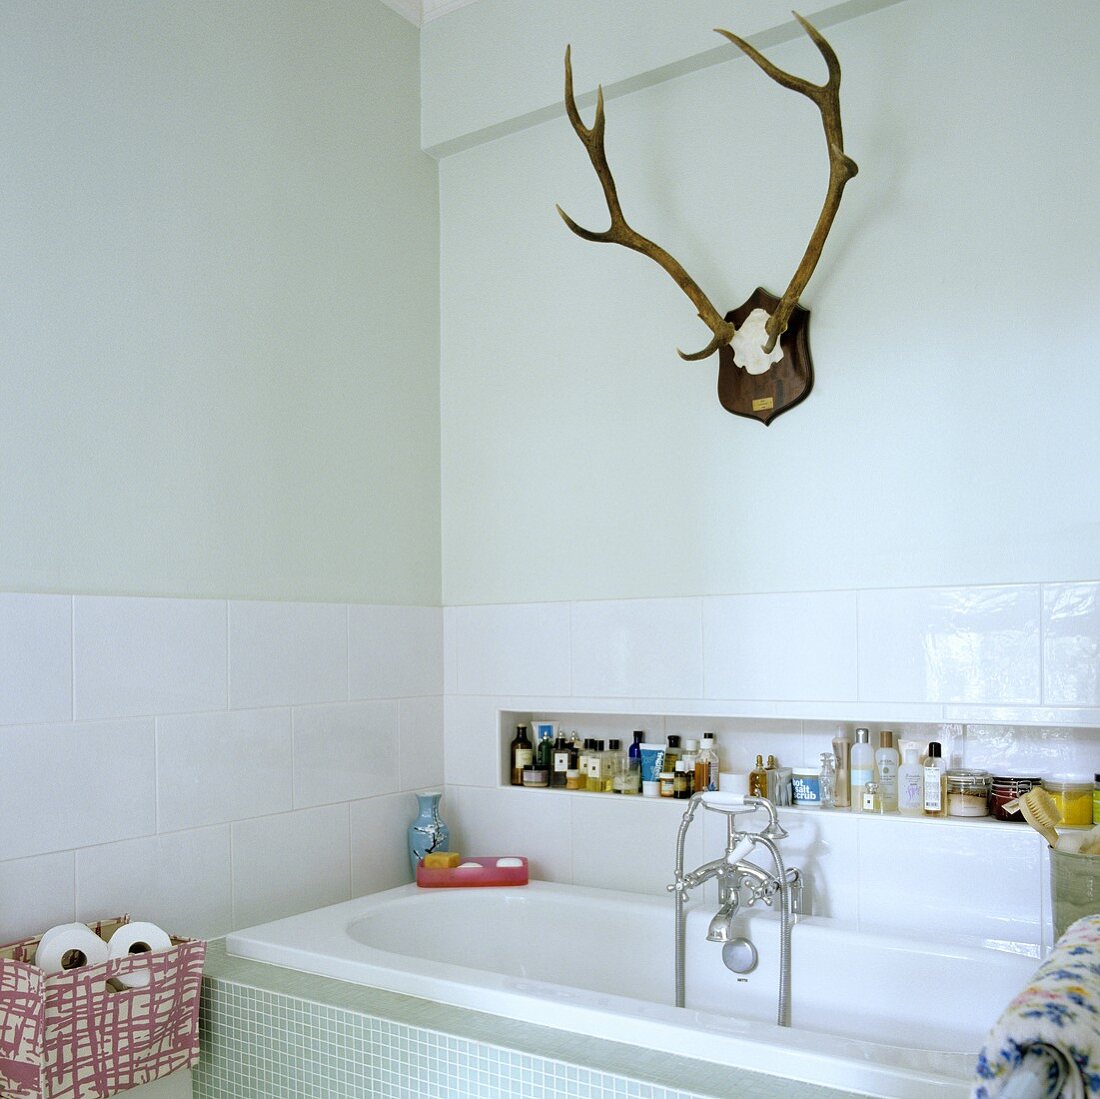 Antlers in a white bathroom with bathtub and bathing products in a niche